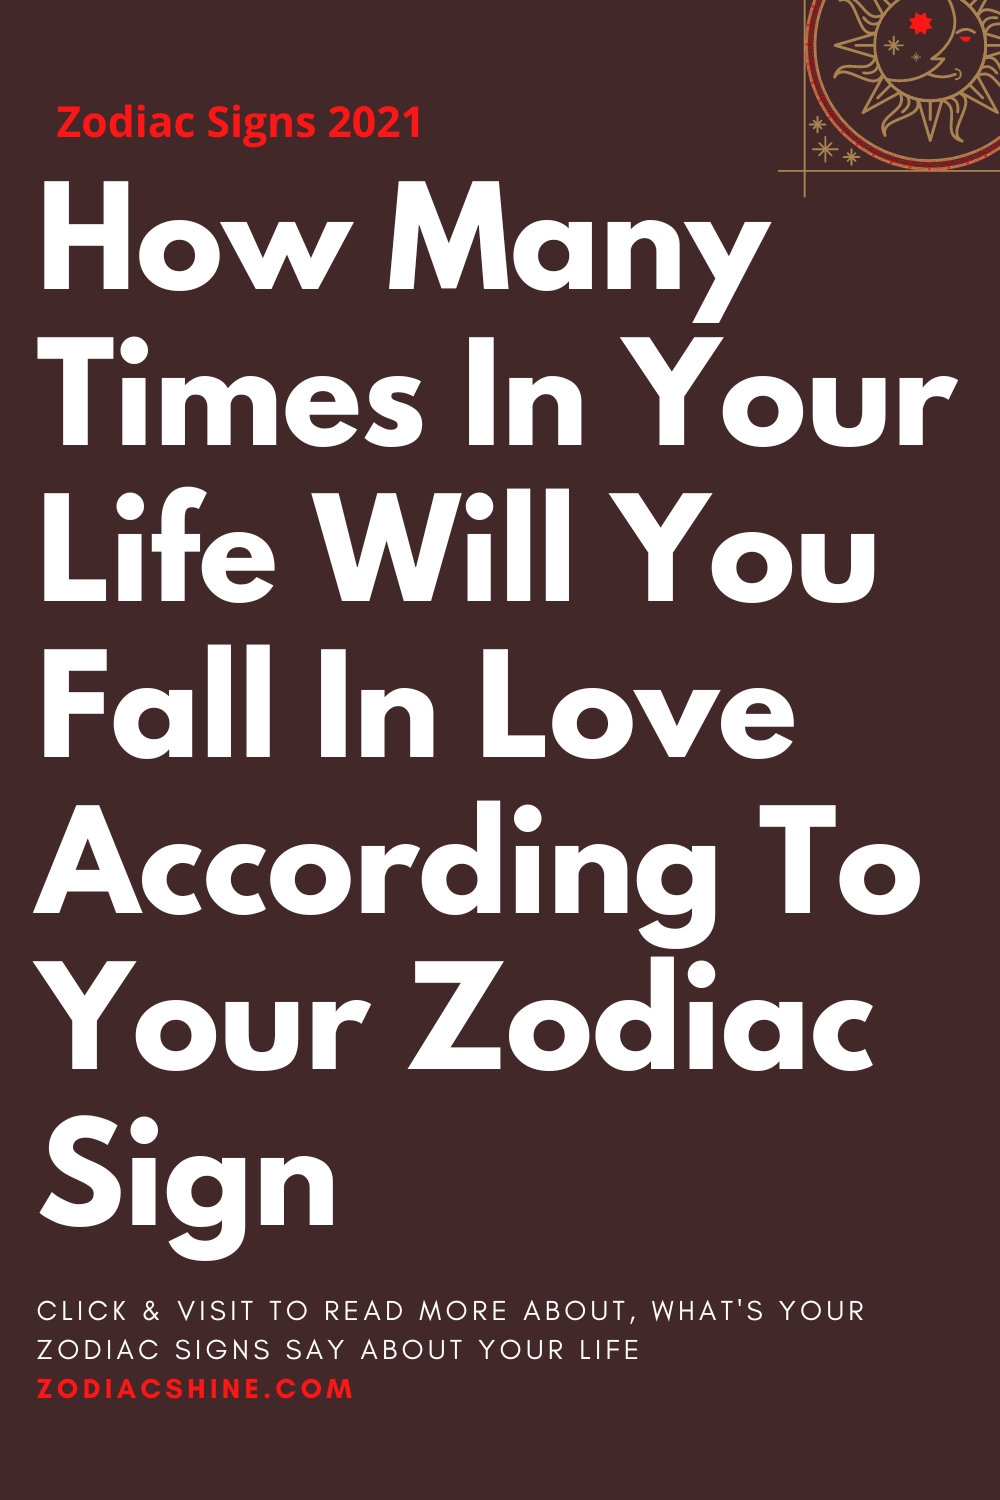 How Many Times In Your Life Will You Fall In Love According To Your Zodiac Sign